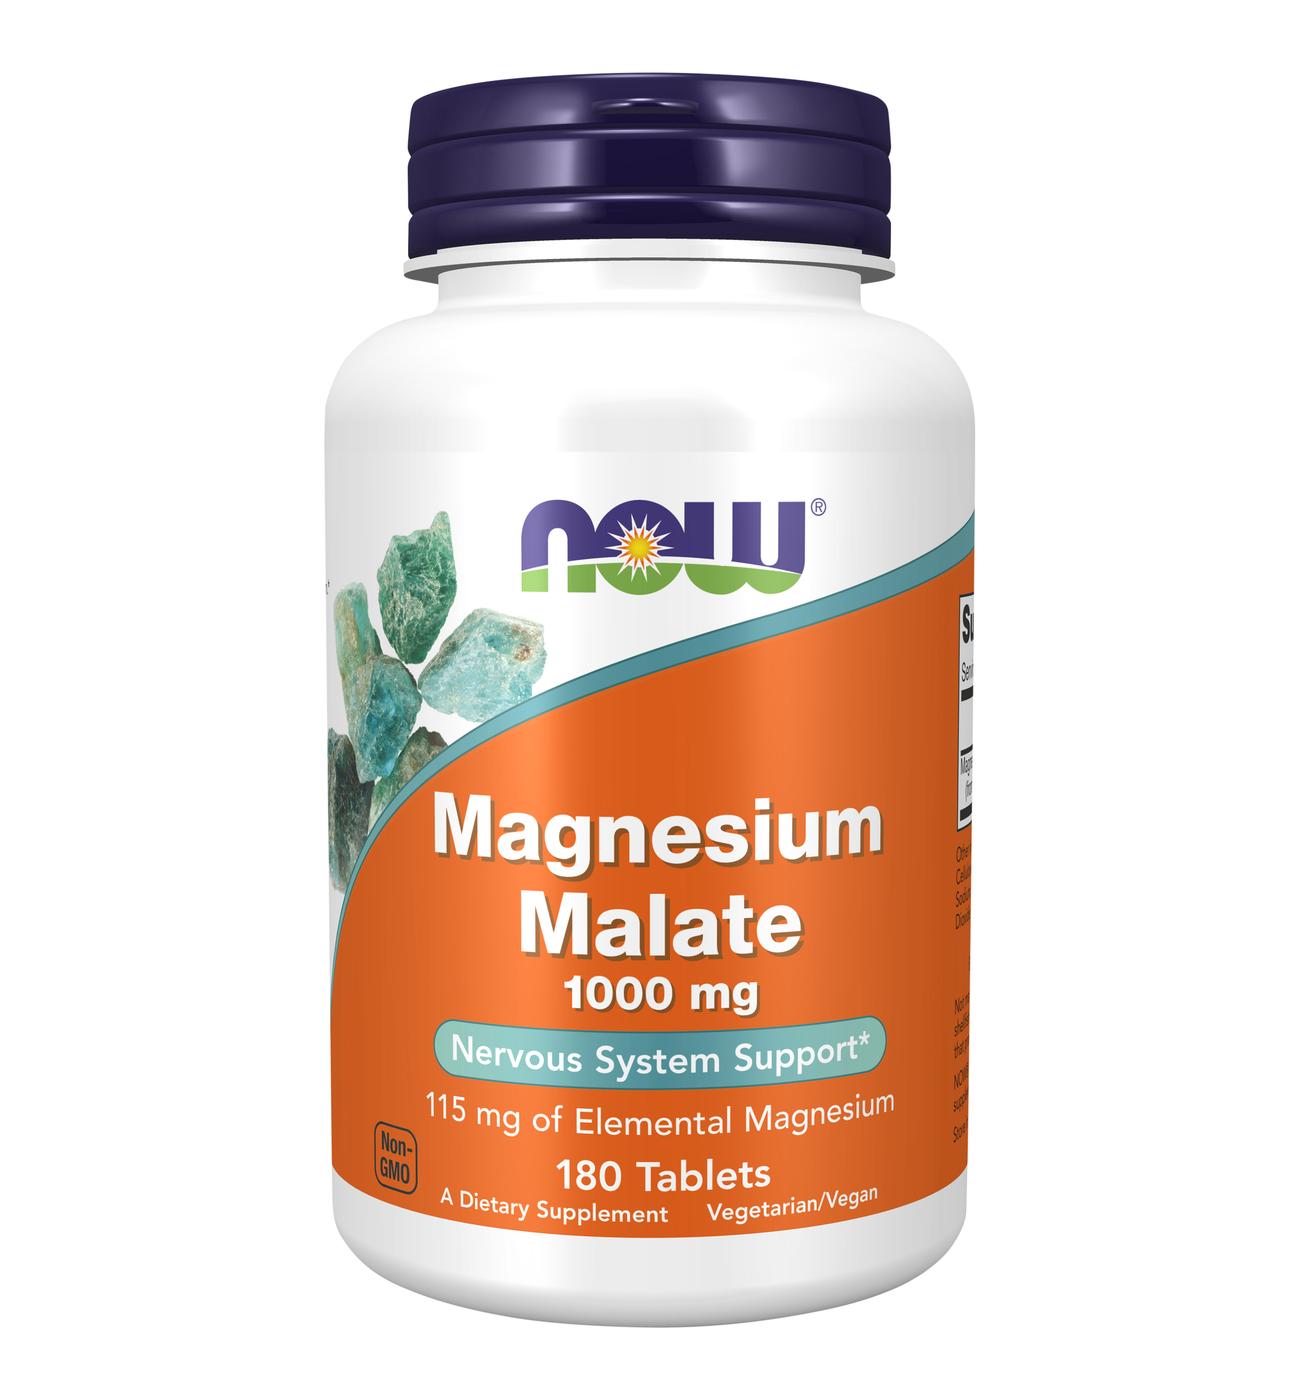 NOW Magnesium Malate 1000 mg Tablets; image 1 of 2